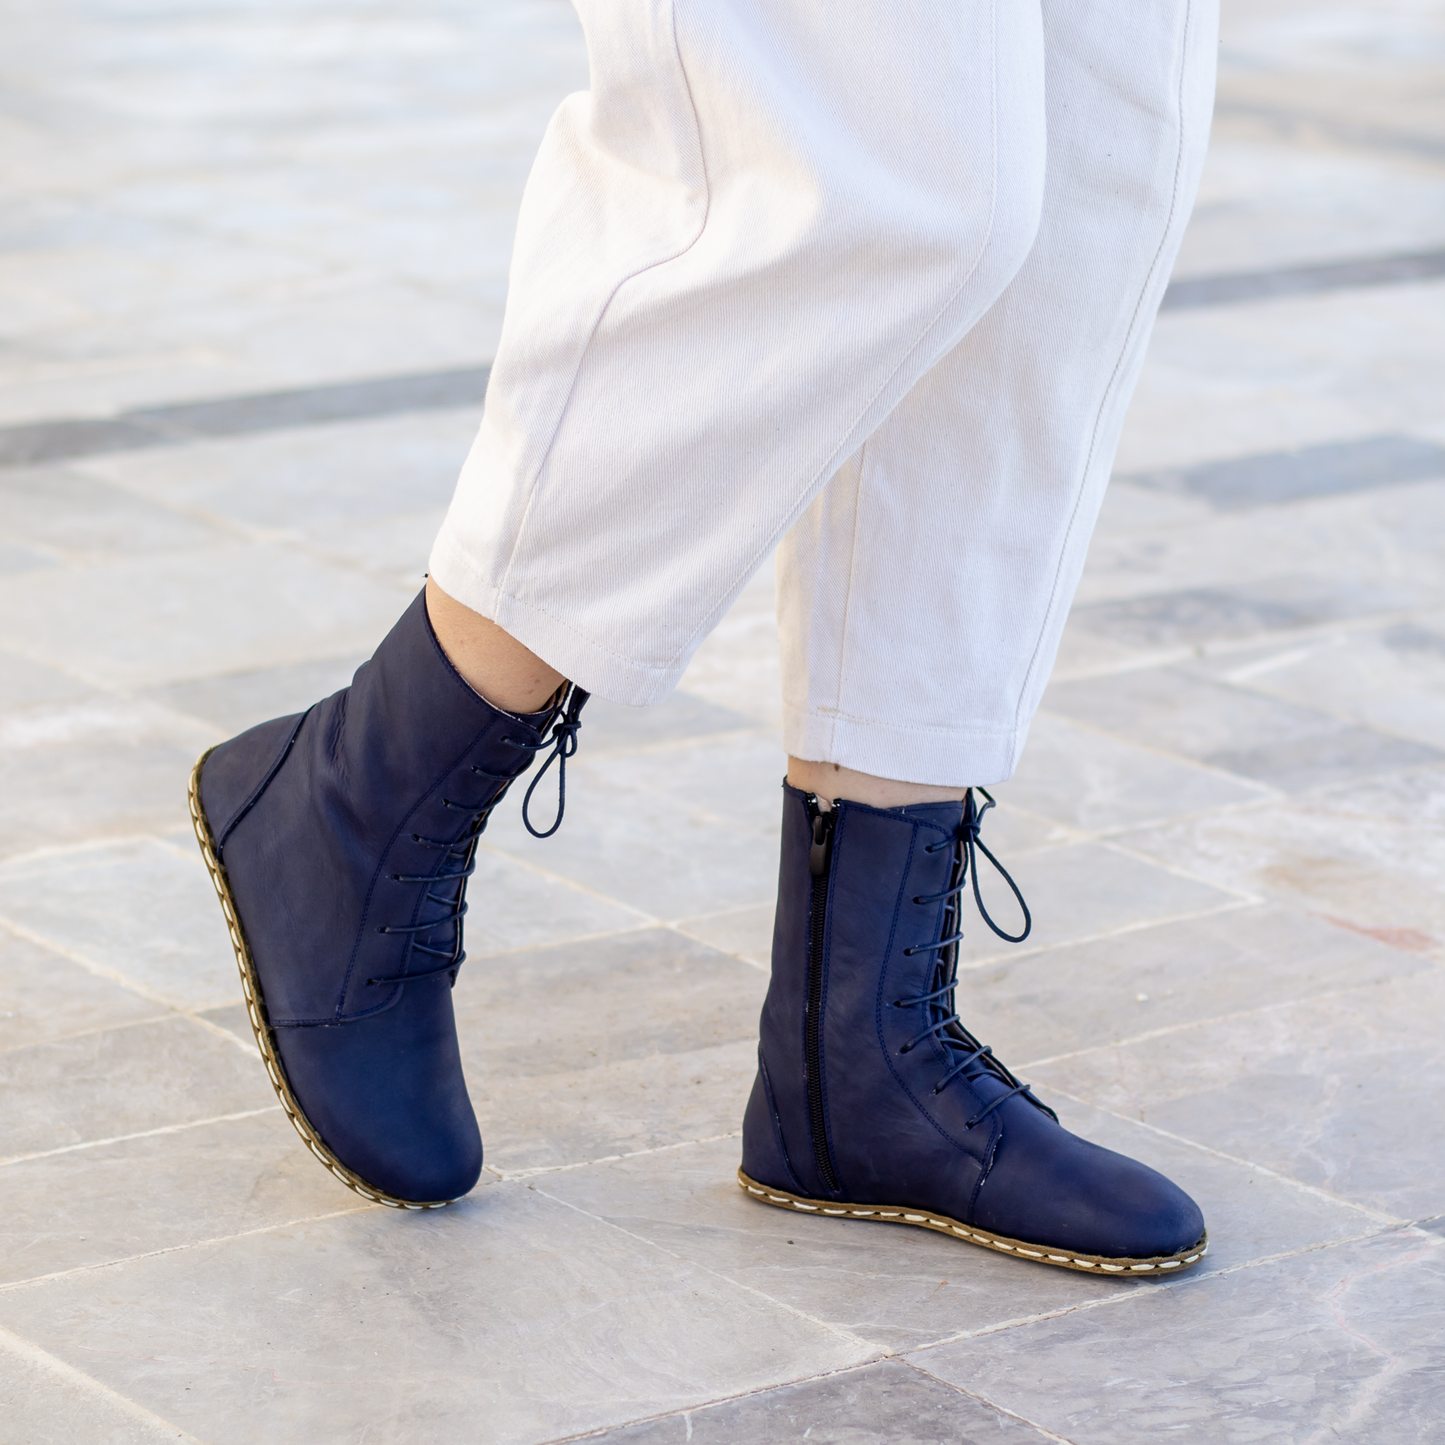 Earthing Leather Boots | Barefoot Women Boot | Grounding Copper Rivet | Buffalo Leather Outsole | Crazy Navy Blue